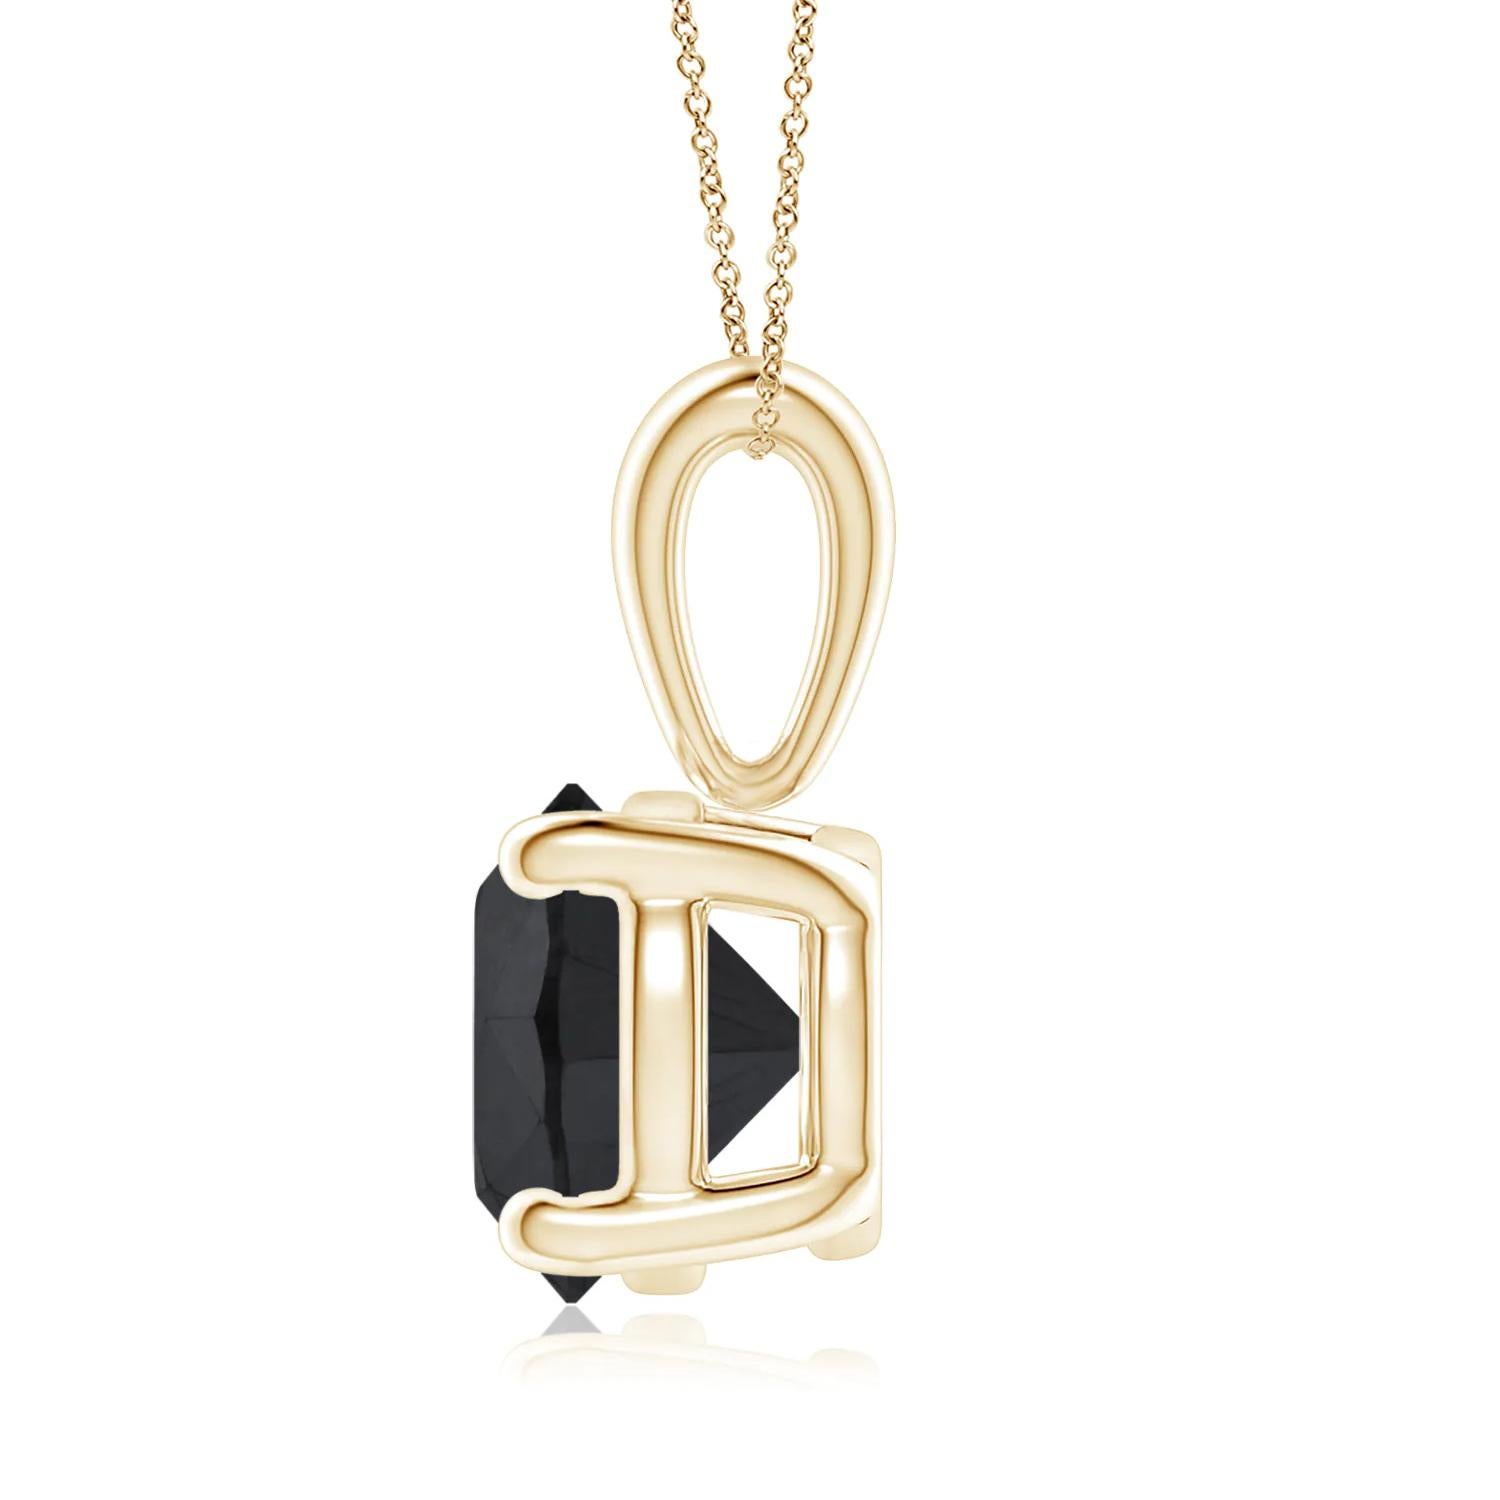 Round Cut 1.92 Carat Round Black Diamond Solitaire Pendant Necklace in 14K Yellow Gold